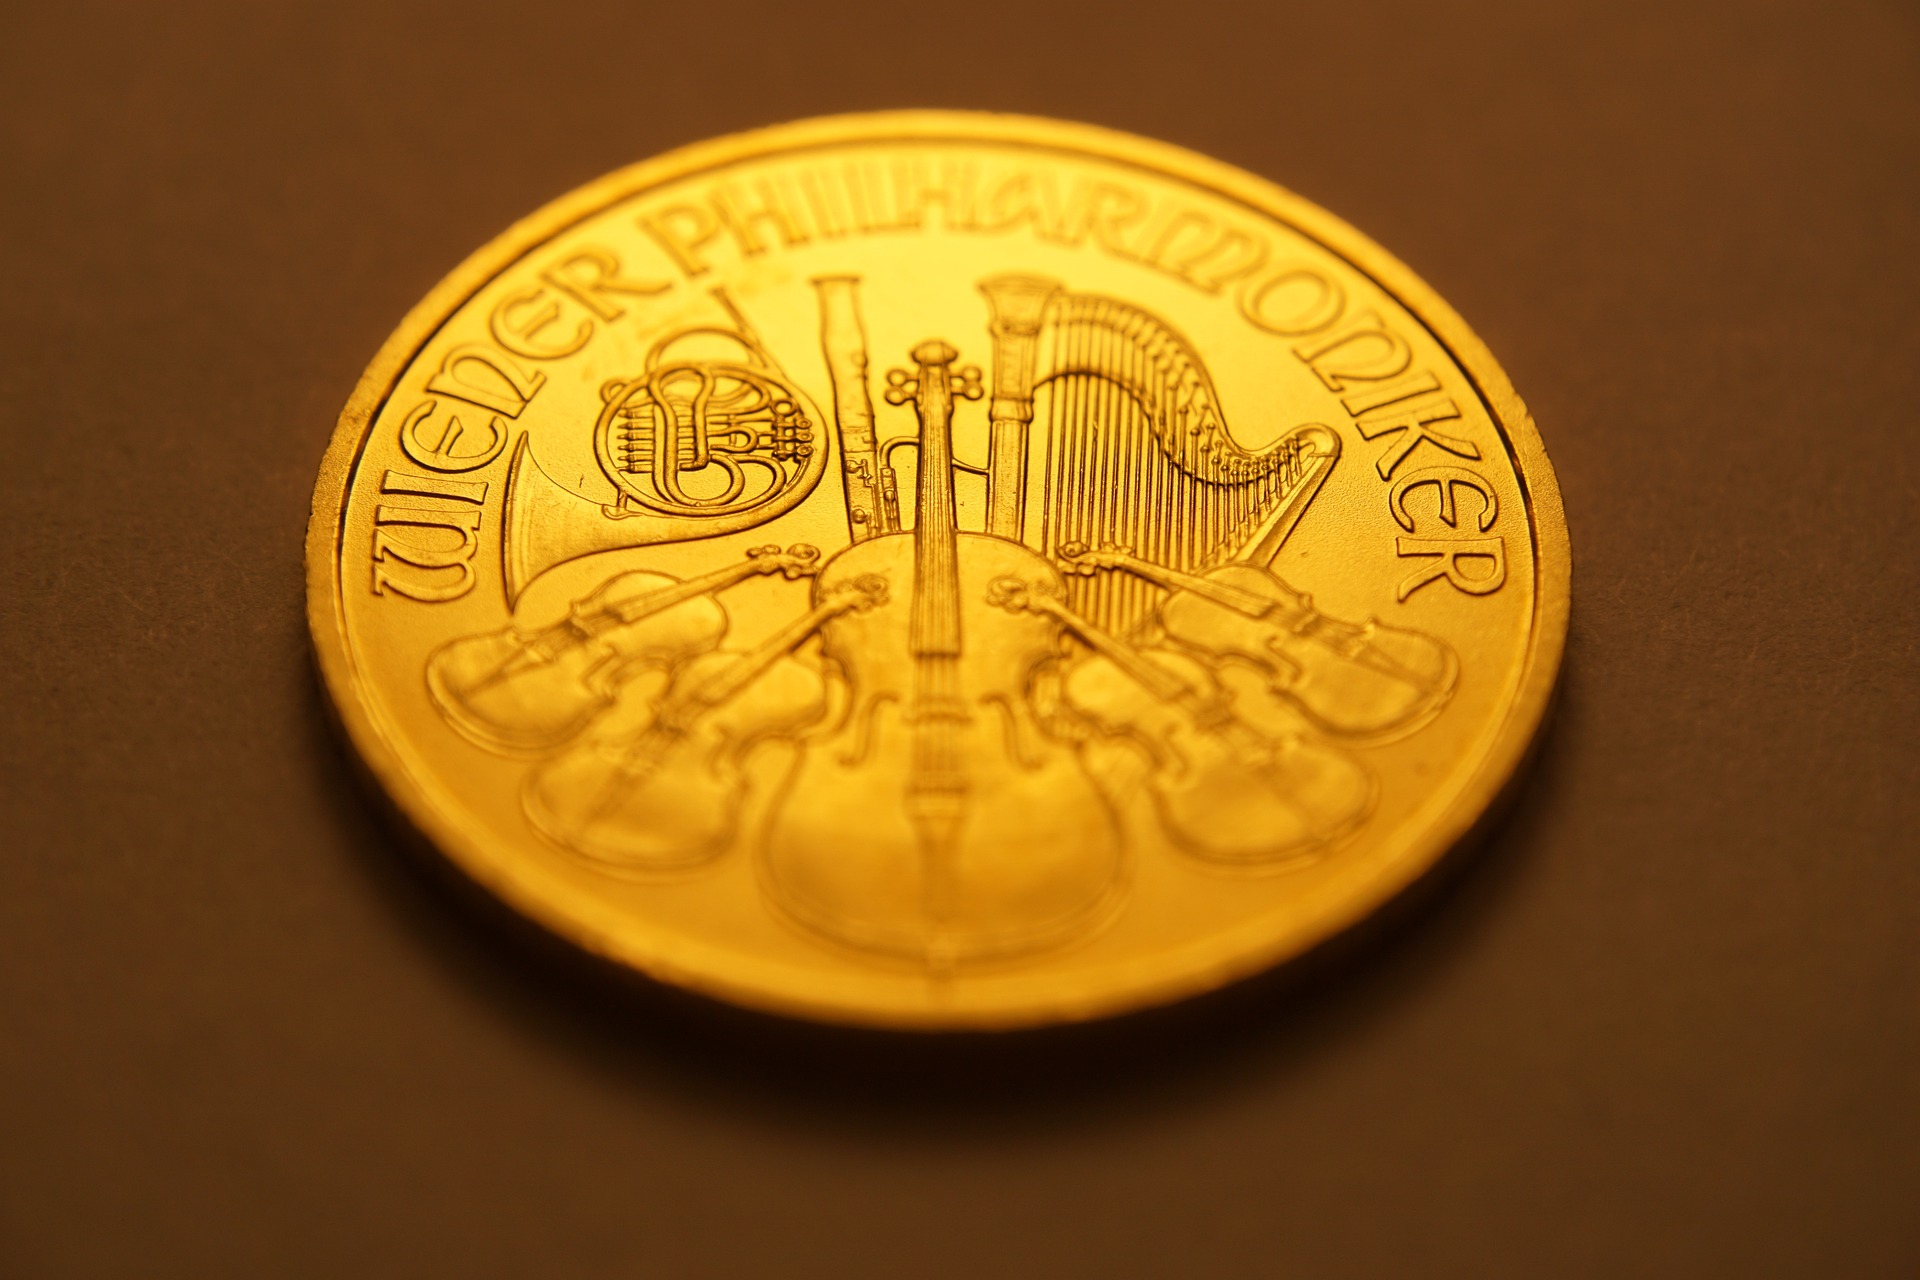 Close-up view of a Vienna Philharmonic gold coin